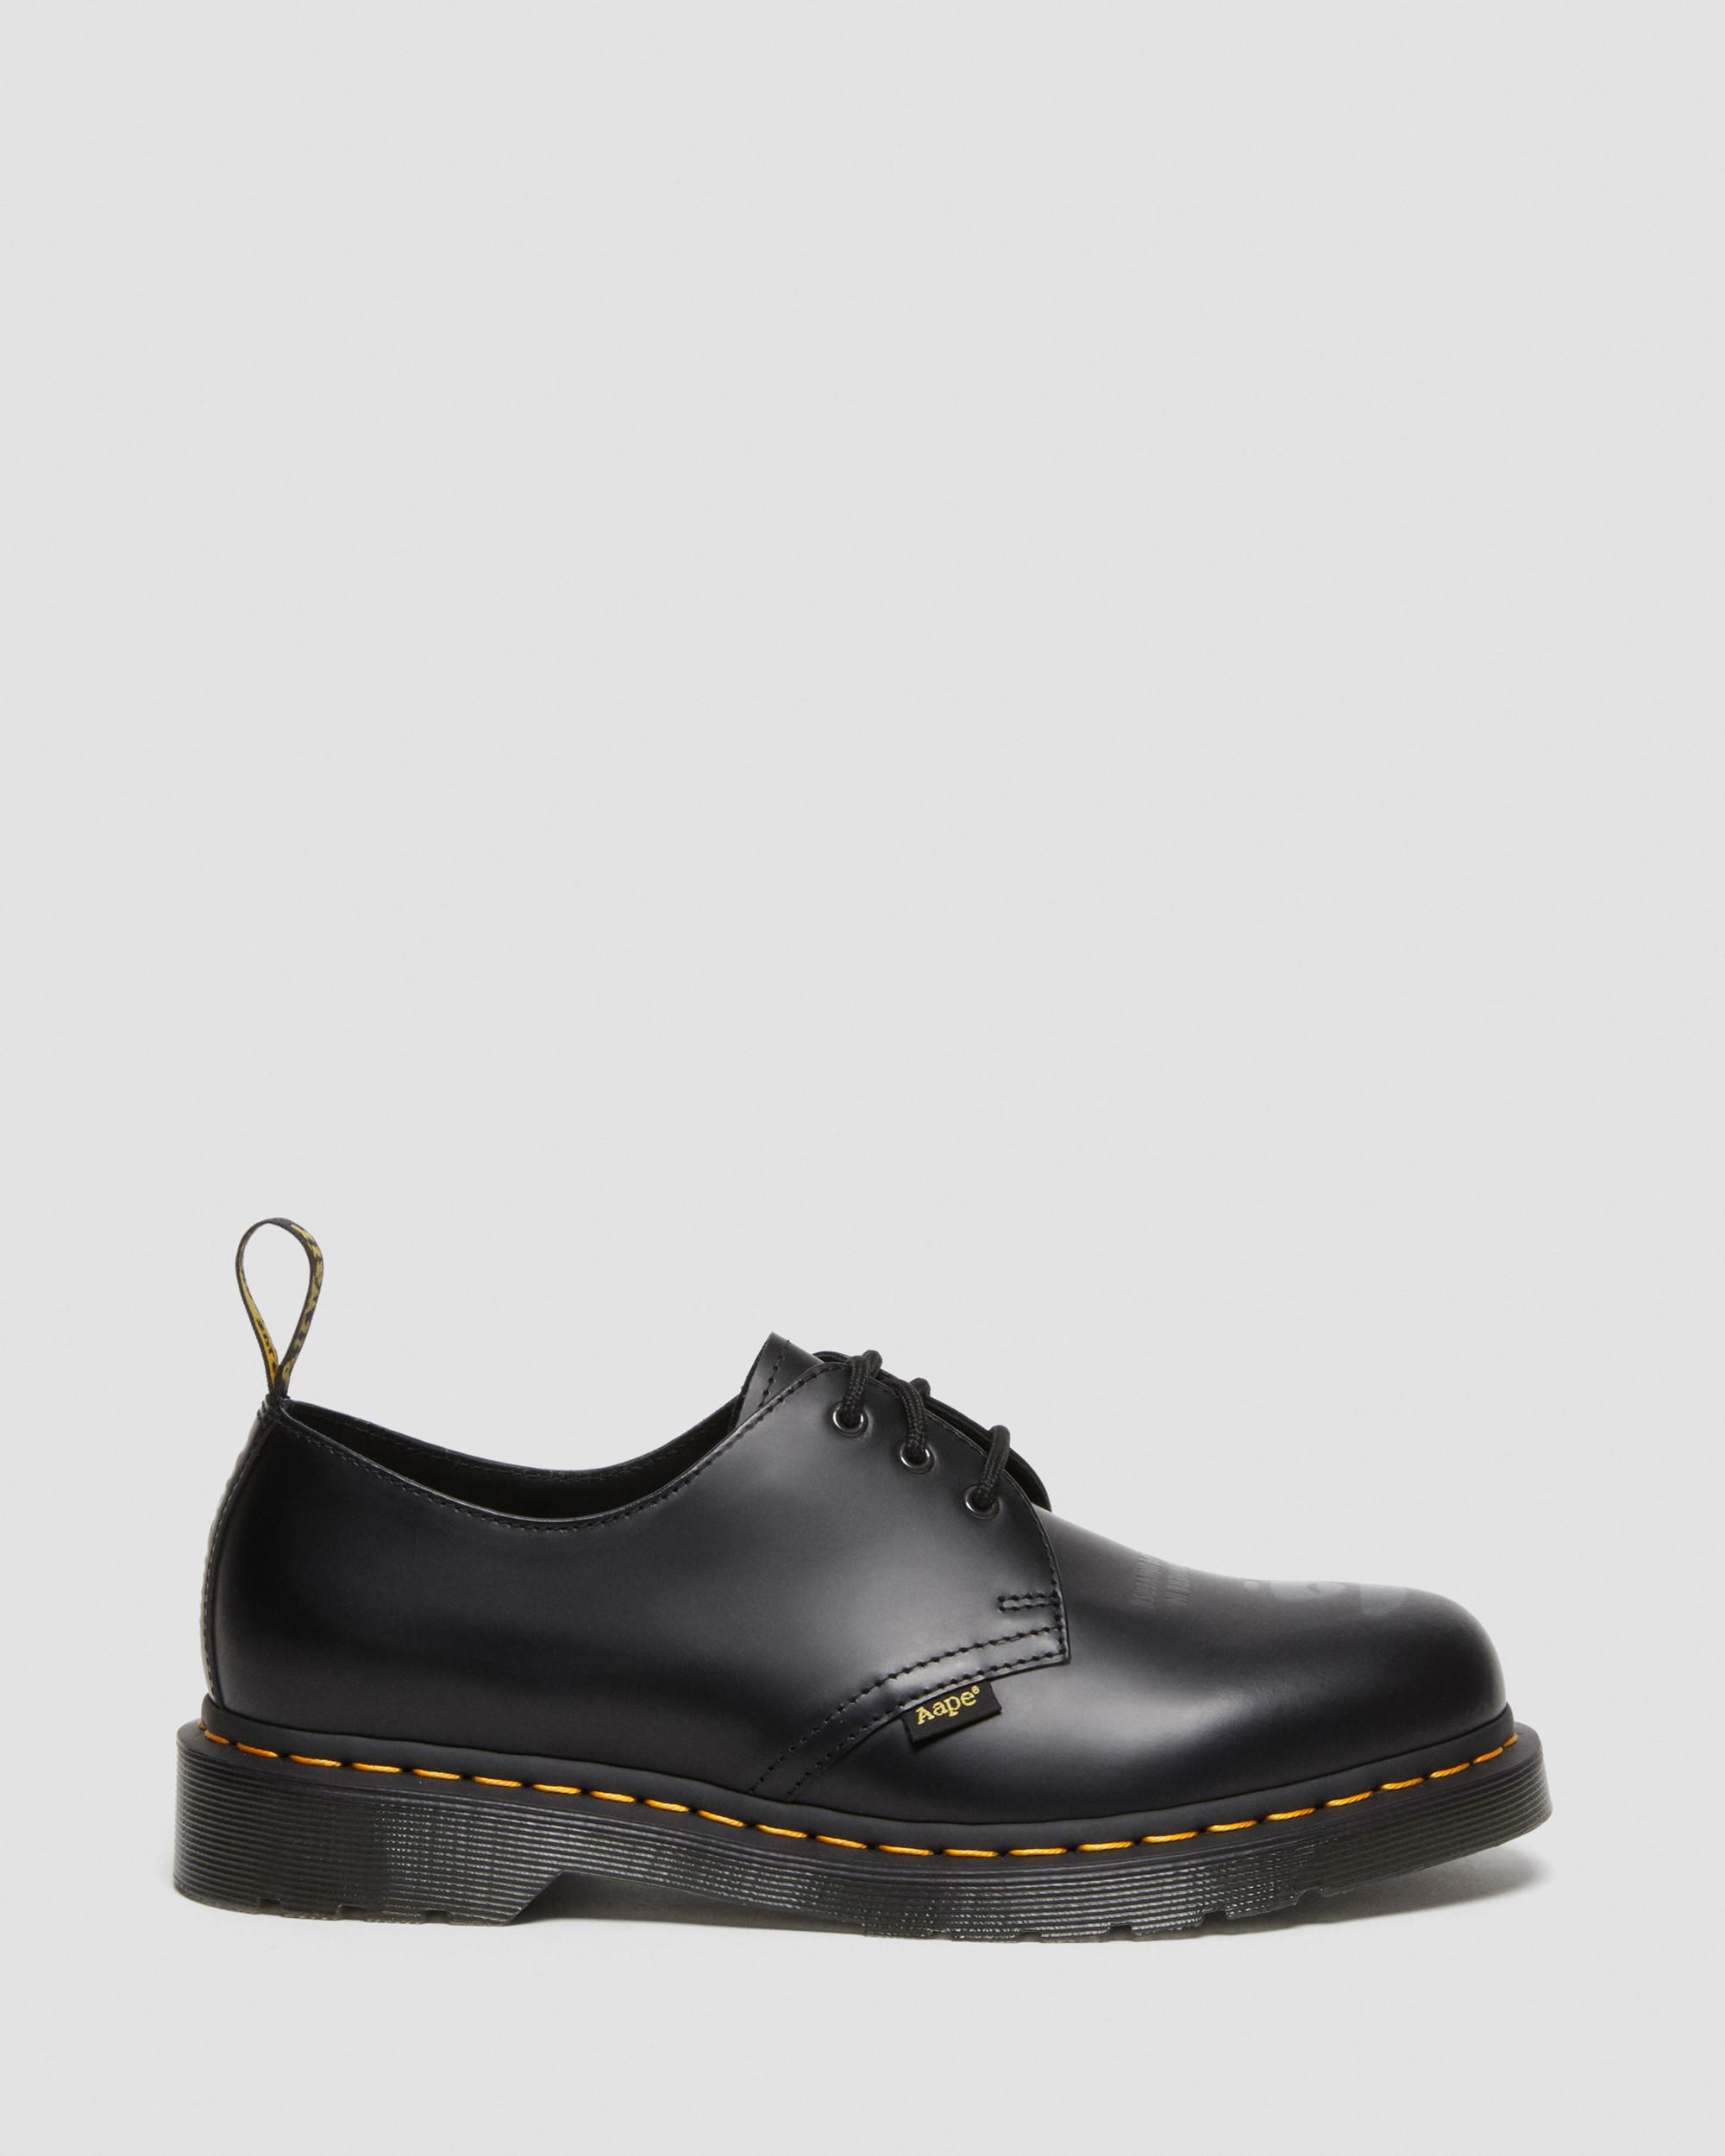 1461 AAPE Smooth Leather Shoes in Black